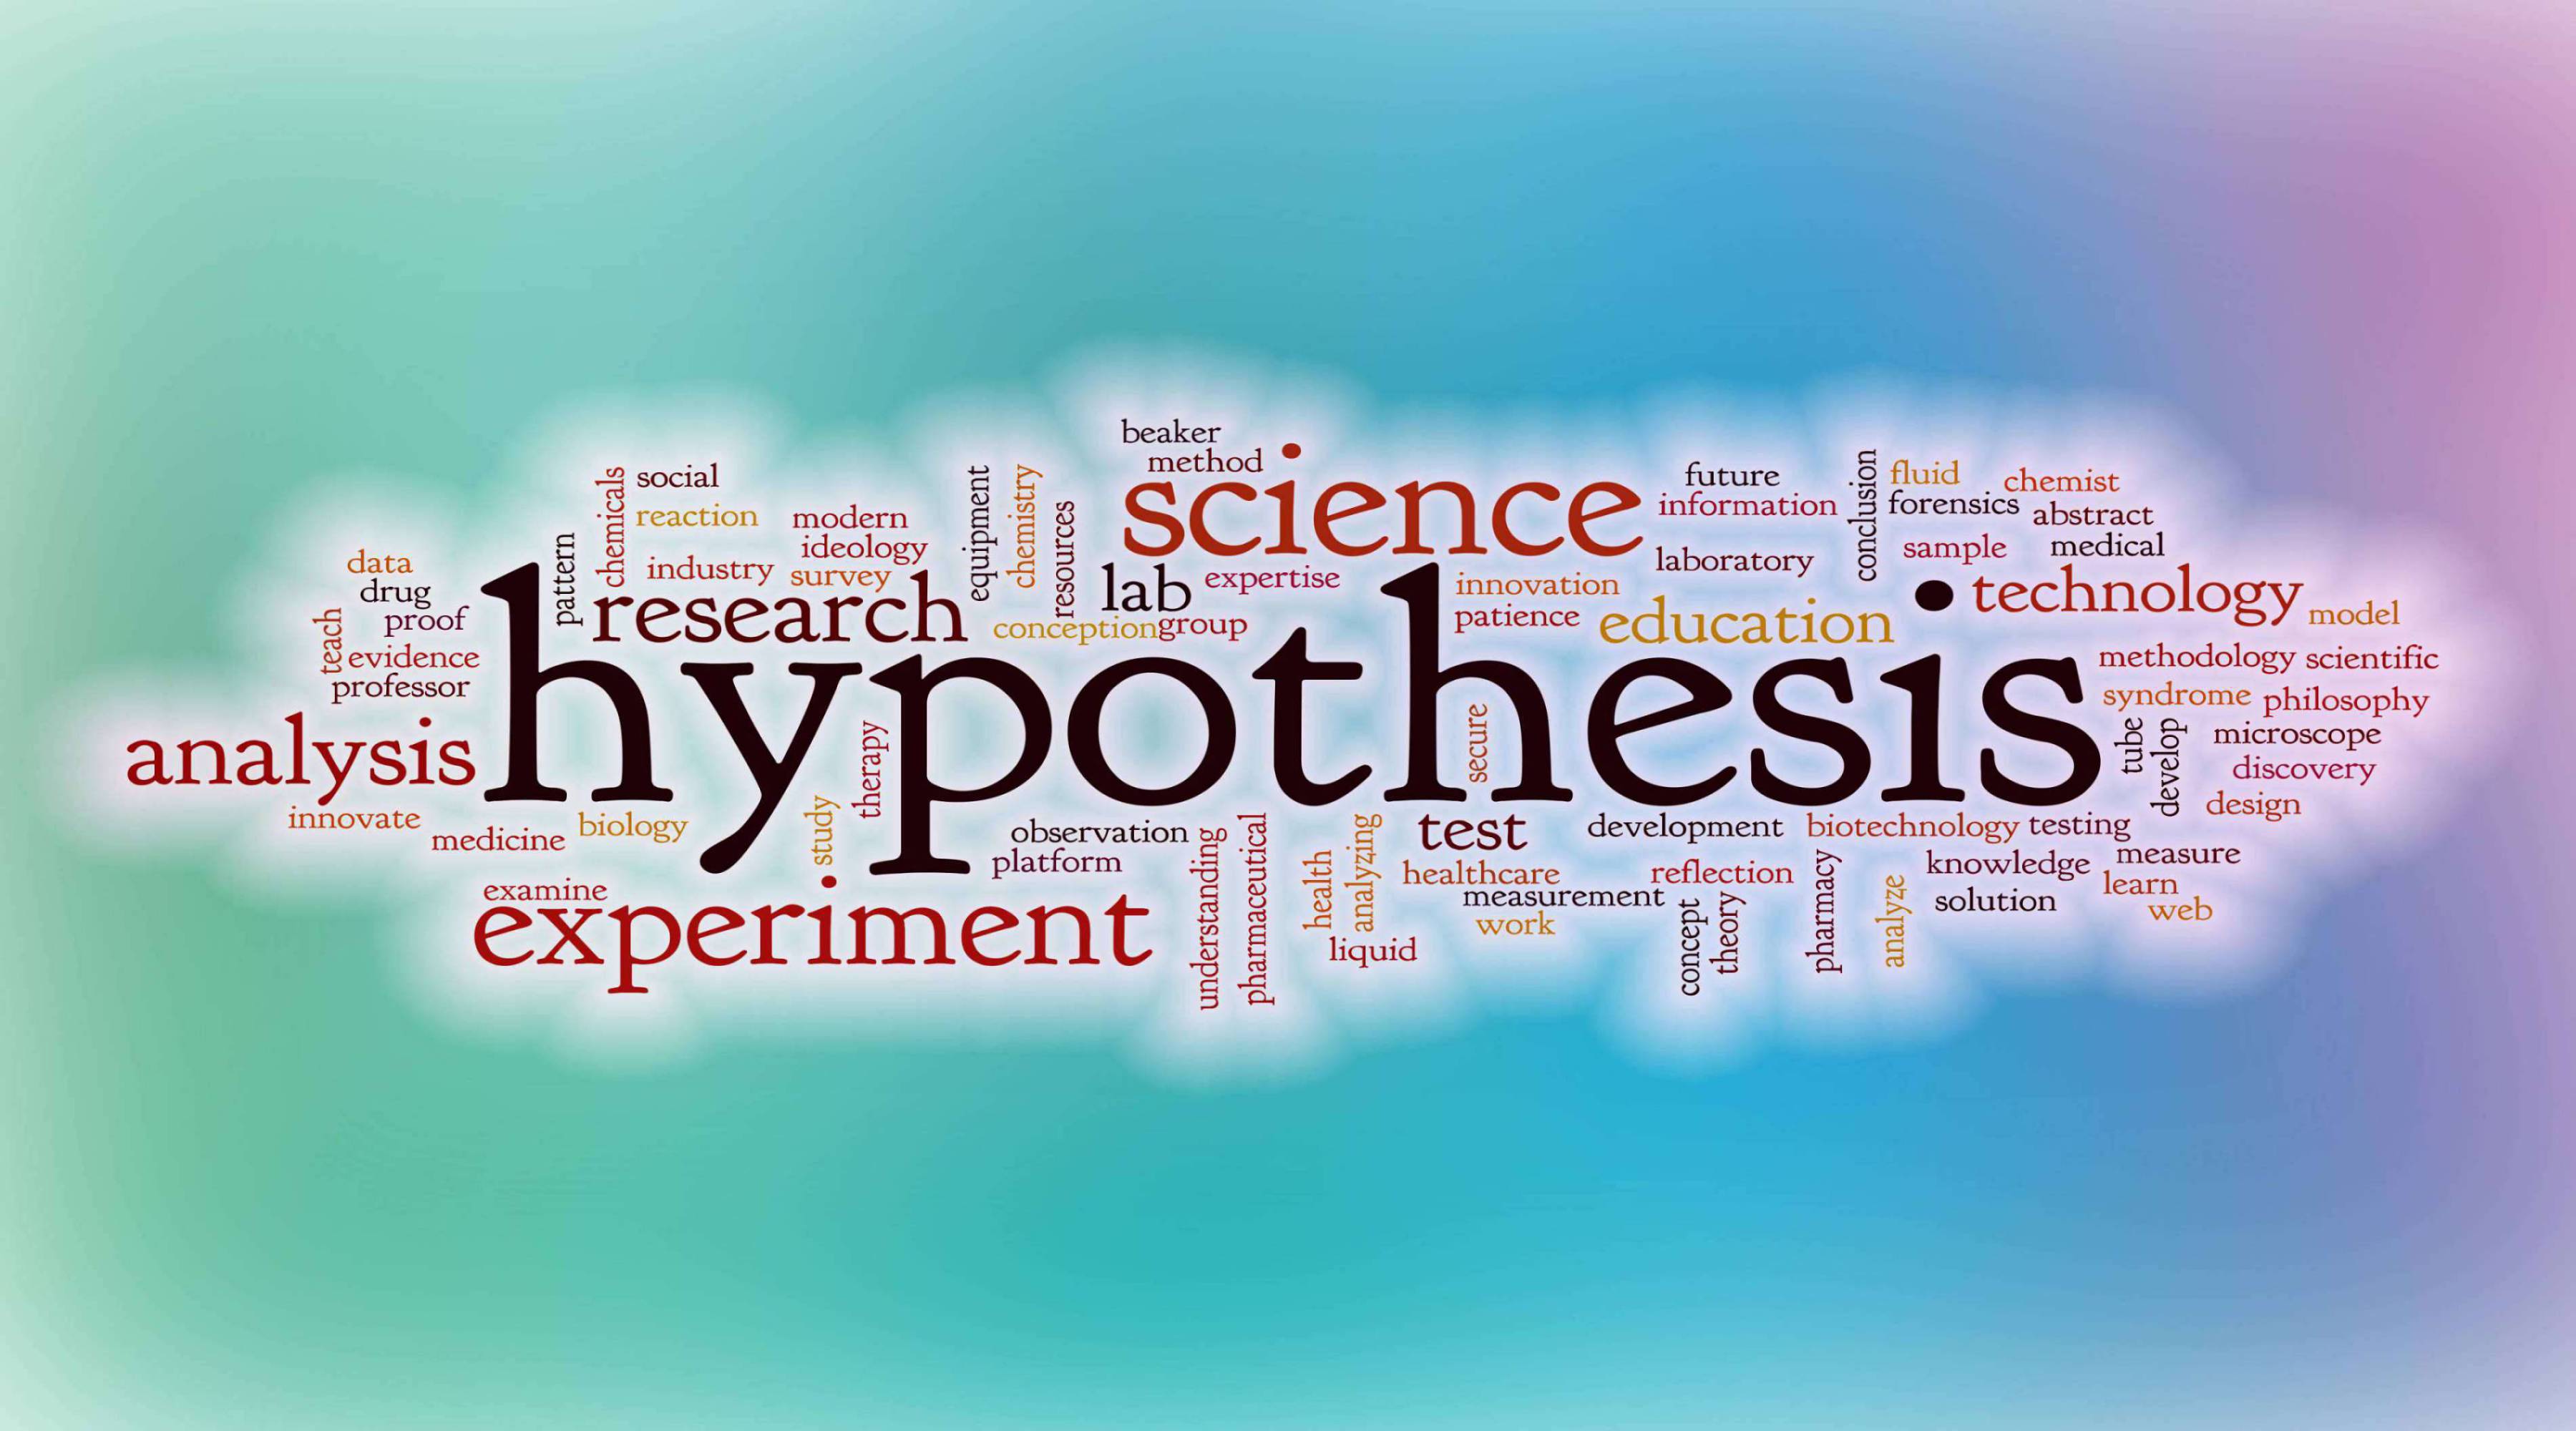 This slide also includes one image: the word cloud, which consists of words such as experiment, analysis, science, and the main word, hypothesis. The source of image is lculig/iStockphoto/Getty Images.